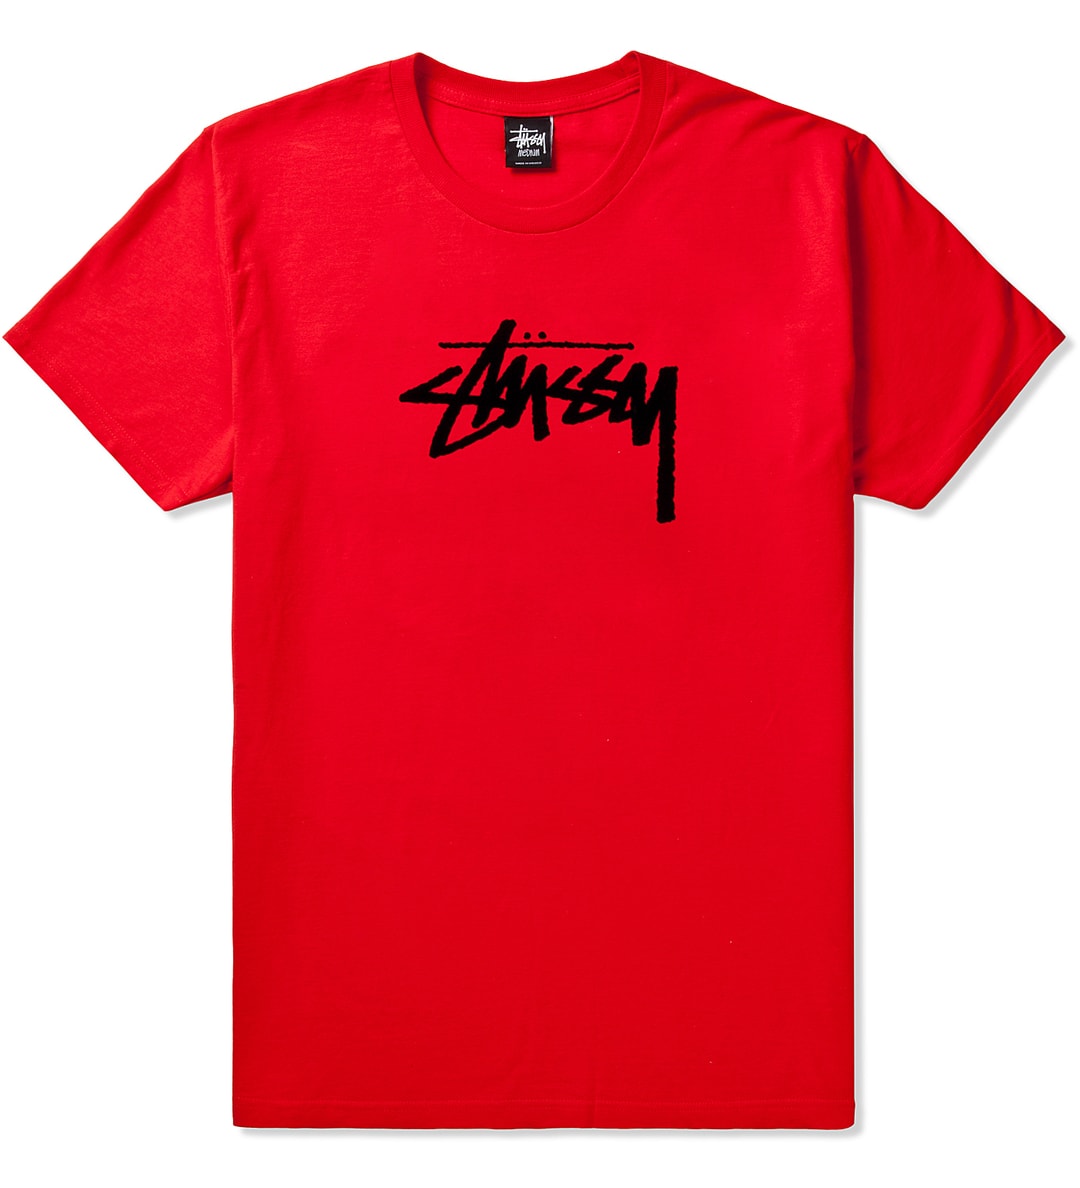 Stüssy - Bike Red Flock Stock T-Shirt | HBX - Globally Curated Fashion ...